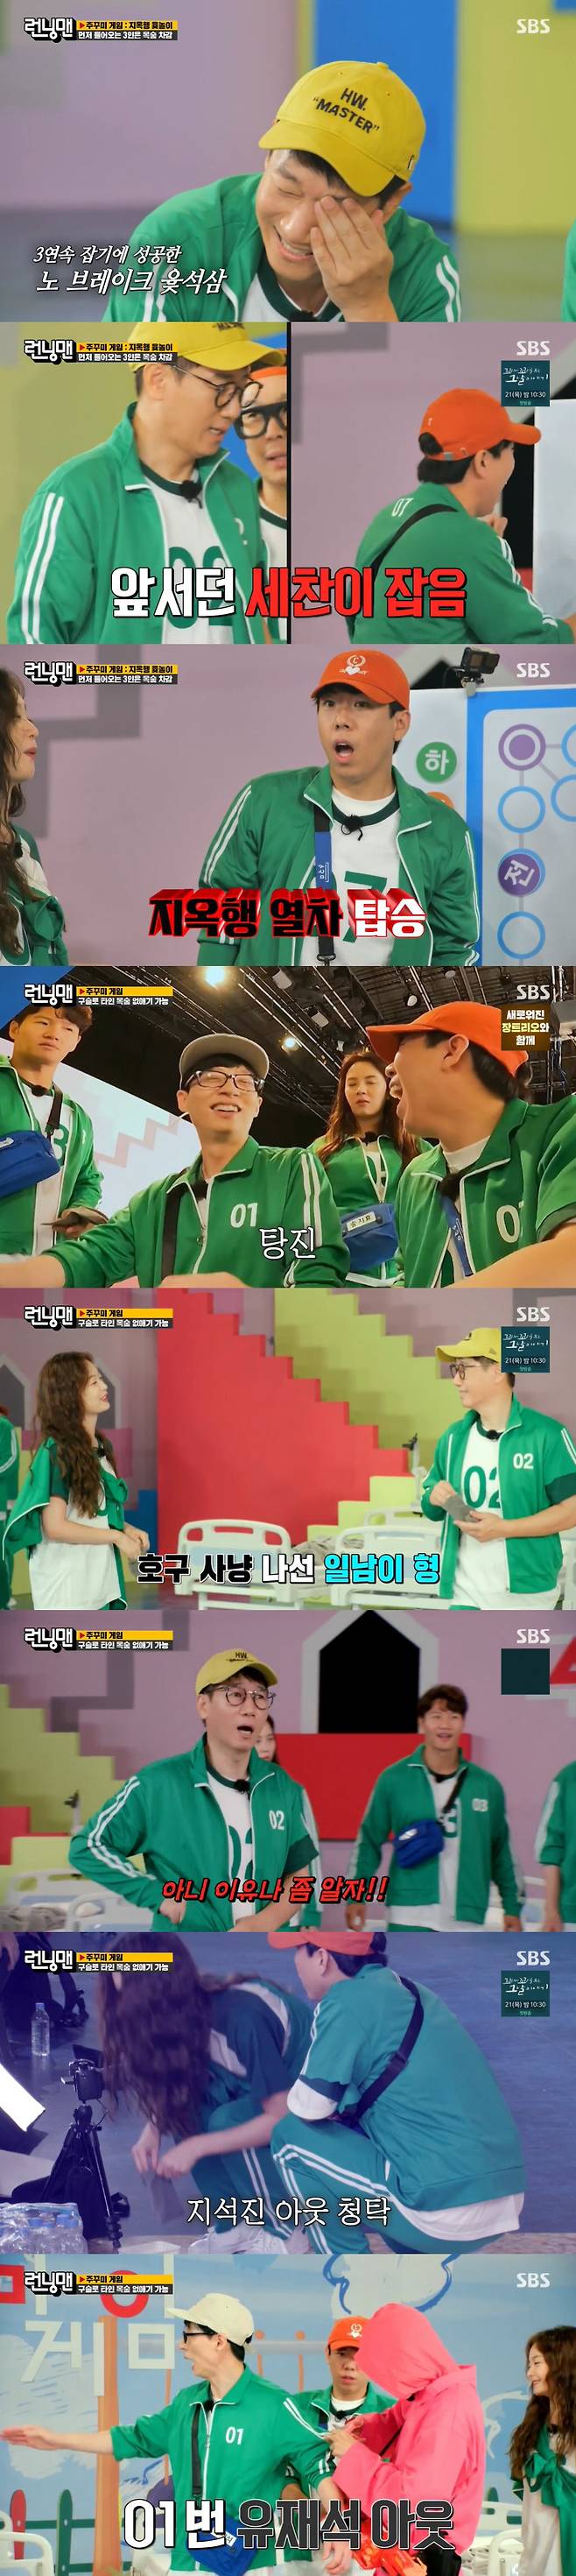 Running Man Yoo Jae-Suk won the final title at Jukumi Game Race and won 3 million won.On SBS Running Man broadcasted on the 17th, Jukumi Game Race, which reinterprets the drama Squid Game, which is popular all over the world, in Running Man way, was decorated.Seven members arrived at their respective places on the day. Then a questioning agent appeared and proceeded with the scab.The agent offered to give 10,000 won every time he passed the ticket, and two tickets were given to the members, but all members except for Jeon So-min were taken away and game over.At that time, the agents gave an invitation to Will you participate in the game of the kukumi? And the members who took off the eye patch were surprised by the extraordinary scale.Prior to the first game, the members except Kim Jong-kook made the beads Empresses in the Palace with the money they earned through scabs.Paying 10 beads will allow the desired participant to eliminate one persons life, and the beads are provided with three additional beads each hour.Haha and Jeon So-min entered the betting room to call the Empresses in the Palace, and Yoo Jae-Suk and Yang Se-chan, who were then taken away by the stone, made a cane and eliminated one of Ji Suk-jins lives.The first game is a game to hell, and it is a game that loses its life if it is scored first.Yang Se-chan started to stand out after Ji Suk-jin caught the overwhelming solo.At that time, Ji Suk-jin grabbed the lead Yang Se-chan and then laughed with a super-strong tension, such as dancing to the breakless solo until the yun.In the end, Ji Suk-jin was the first to die in hell, followed by Haha and Yang Se-chan.Three beads were paid to the four survivors, and Yoo Jae-Suk and Yang Se-chan played a sipping game in the betting room, but eventually they were squandered.Ji Suk-jin played a sipping game with Jeon So-min in an out-of-the-box match, and Ji Suk-jin succeeded in winning three beads of Jeon So-min, but was out again.Jeon So-mins life was removed by Ji Suk-jin as an out-of-the-box confrontation.Ji Suk-jin said, I can not die alone. He eliminated one of the lives of Yoo Jae-Suk.The second game was randomly played after the team selection, and Yoo Jae-Suk and Ji Suk-jin, Song Ji-hyo and Haha won the tug-of-war game and earned one point.Then Kim Jong-kook and Haha caught fire in a muddy fight, taking each others lives; Haha eventually took all five lives, and turned into agents after being eliminated.The third game is a hide-and-seek of despair, which passes if the number of things to be presented within the time limit is accurately matched.As a result, Ji Suk-jin and Kim Jong-kook were eliminated, and then Yang Se-chan was eliminated with the prize money in front of his nose.The last survivors, Yoo Jae-Suk, Song Ji-hyo and Jeon So-min, will proceed with the cliff-end air game, raise five eggs on the back of their hands, and catch all five and win the prize money.However, Song Ji-hyo failed following Jeon So-min, and the last survivor Yoo Jae-Suk took the challenge.Im not good because of tension, Yoo Jae-Suk succeeded in air Game, and the final winner of the Jukumi Game was Yoo Jae-Suk.